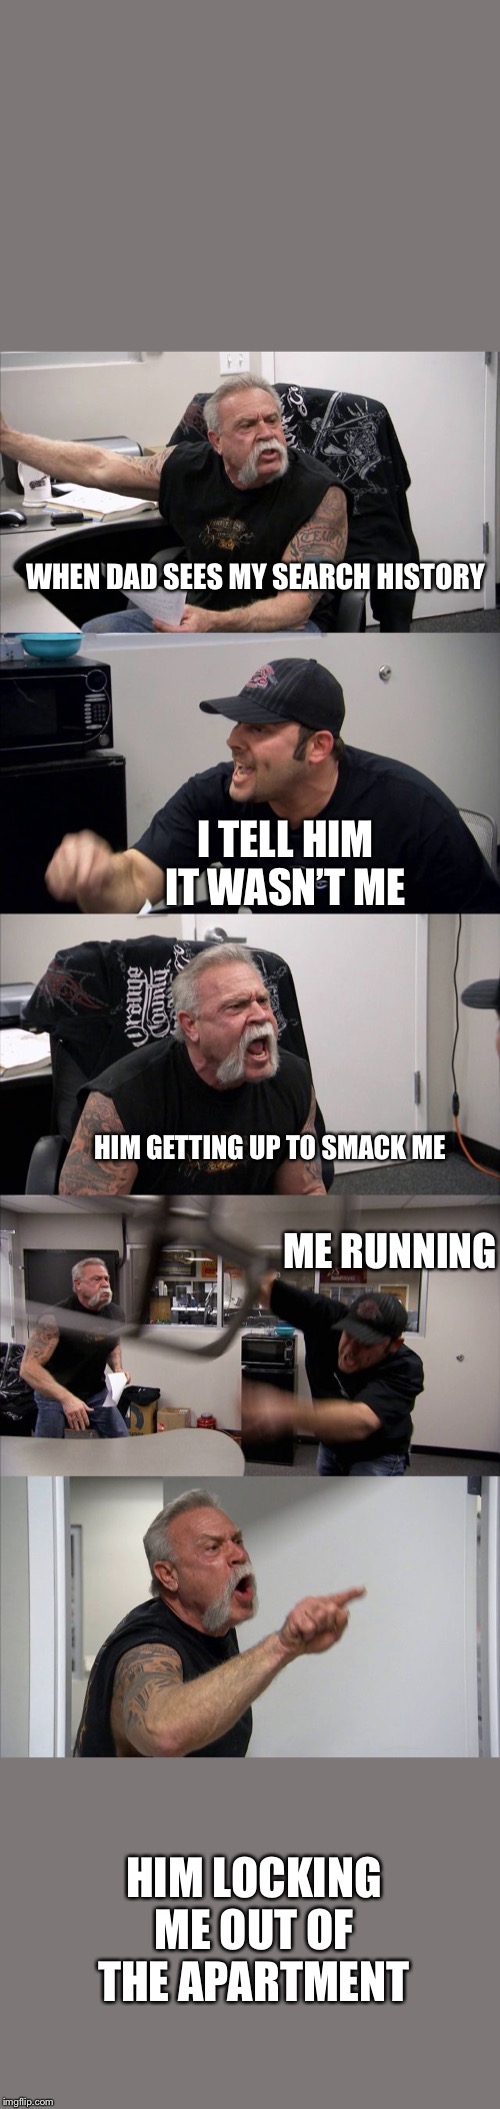 American Chopper Argument | WHEN DAD SEES MY SEARCH HISTORY; I TELL HIM IT WASN’T ME; HIM GETTING UP TO SMACK ME; ME RUNNING; HIM LOCKING ME OUT OF THE APARTMENT | image tagged in memes,american chopper argument | made w/ Imgflip meme maker